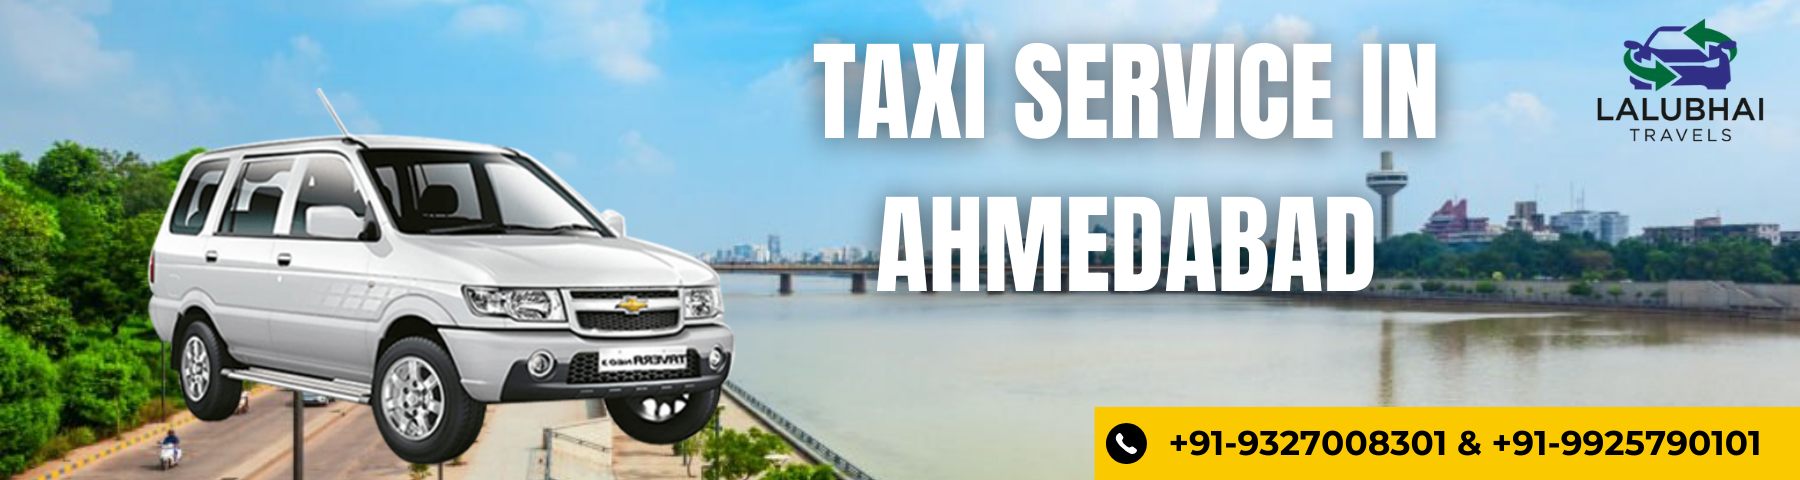 taxi service in ahmedabad